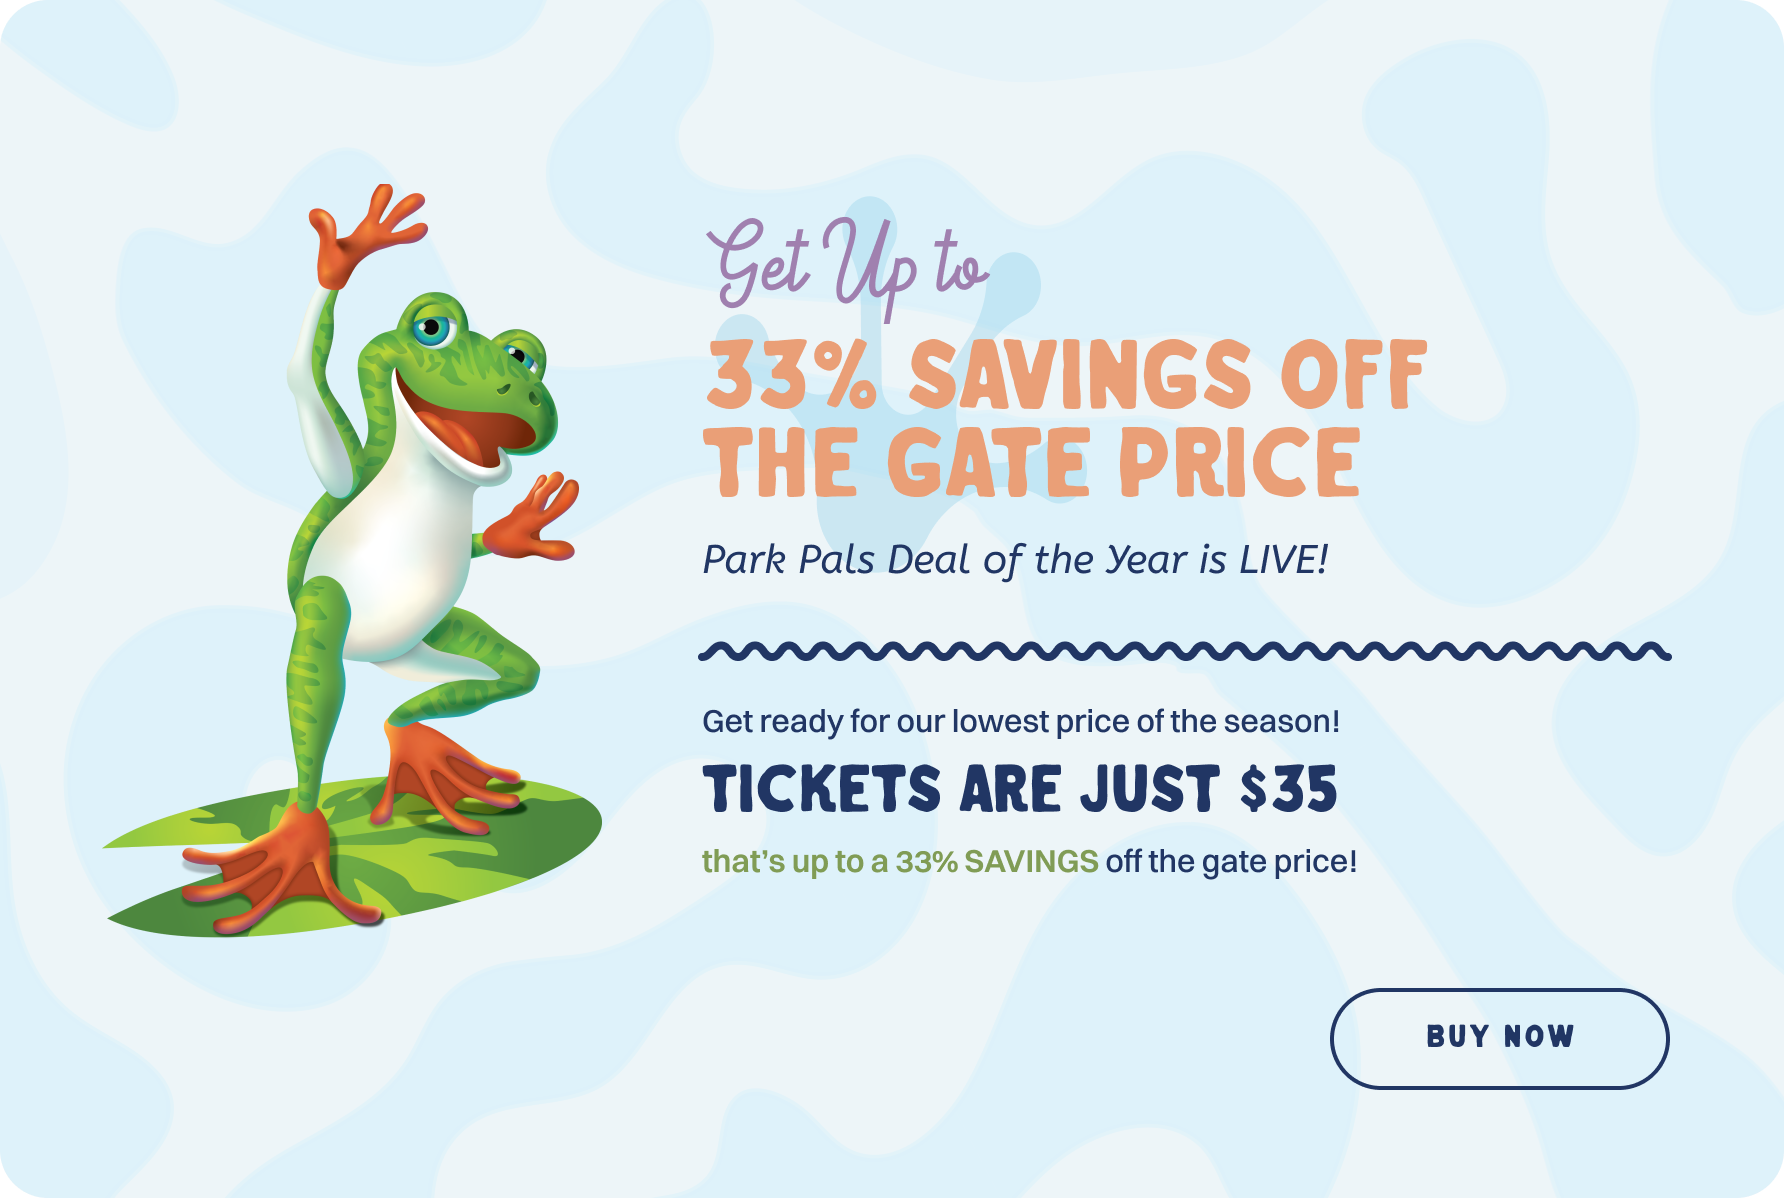 Park Pals Deal of the Year is LIVE!